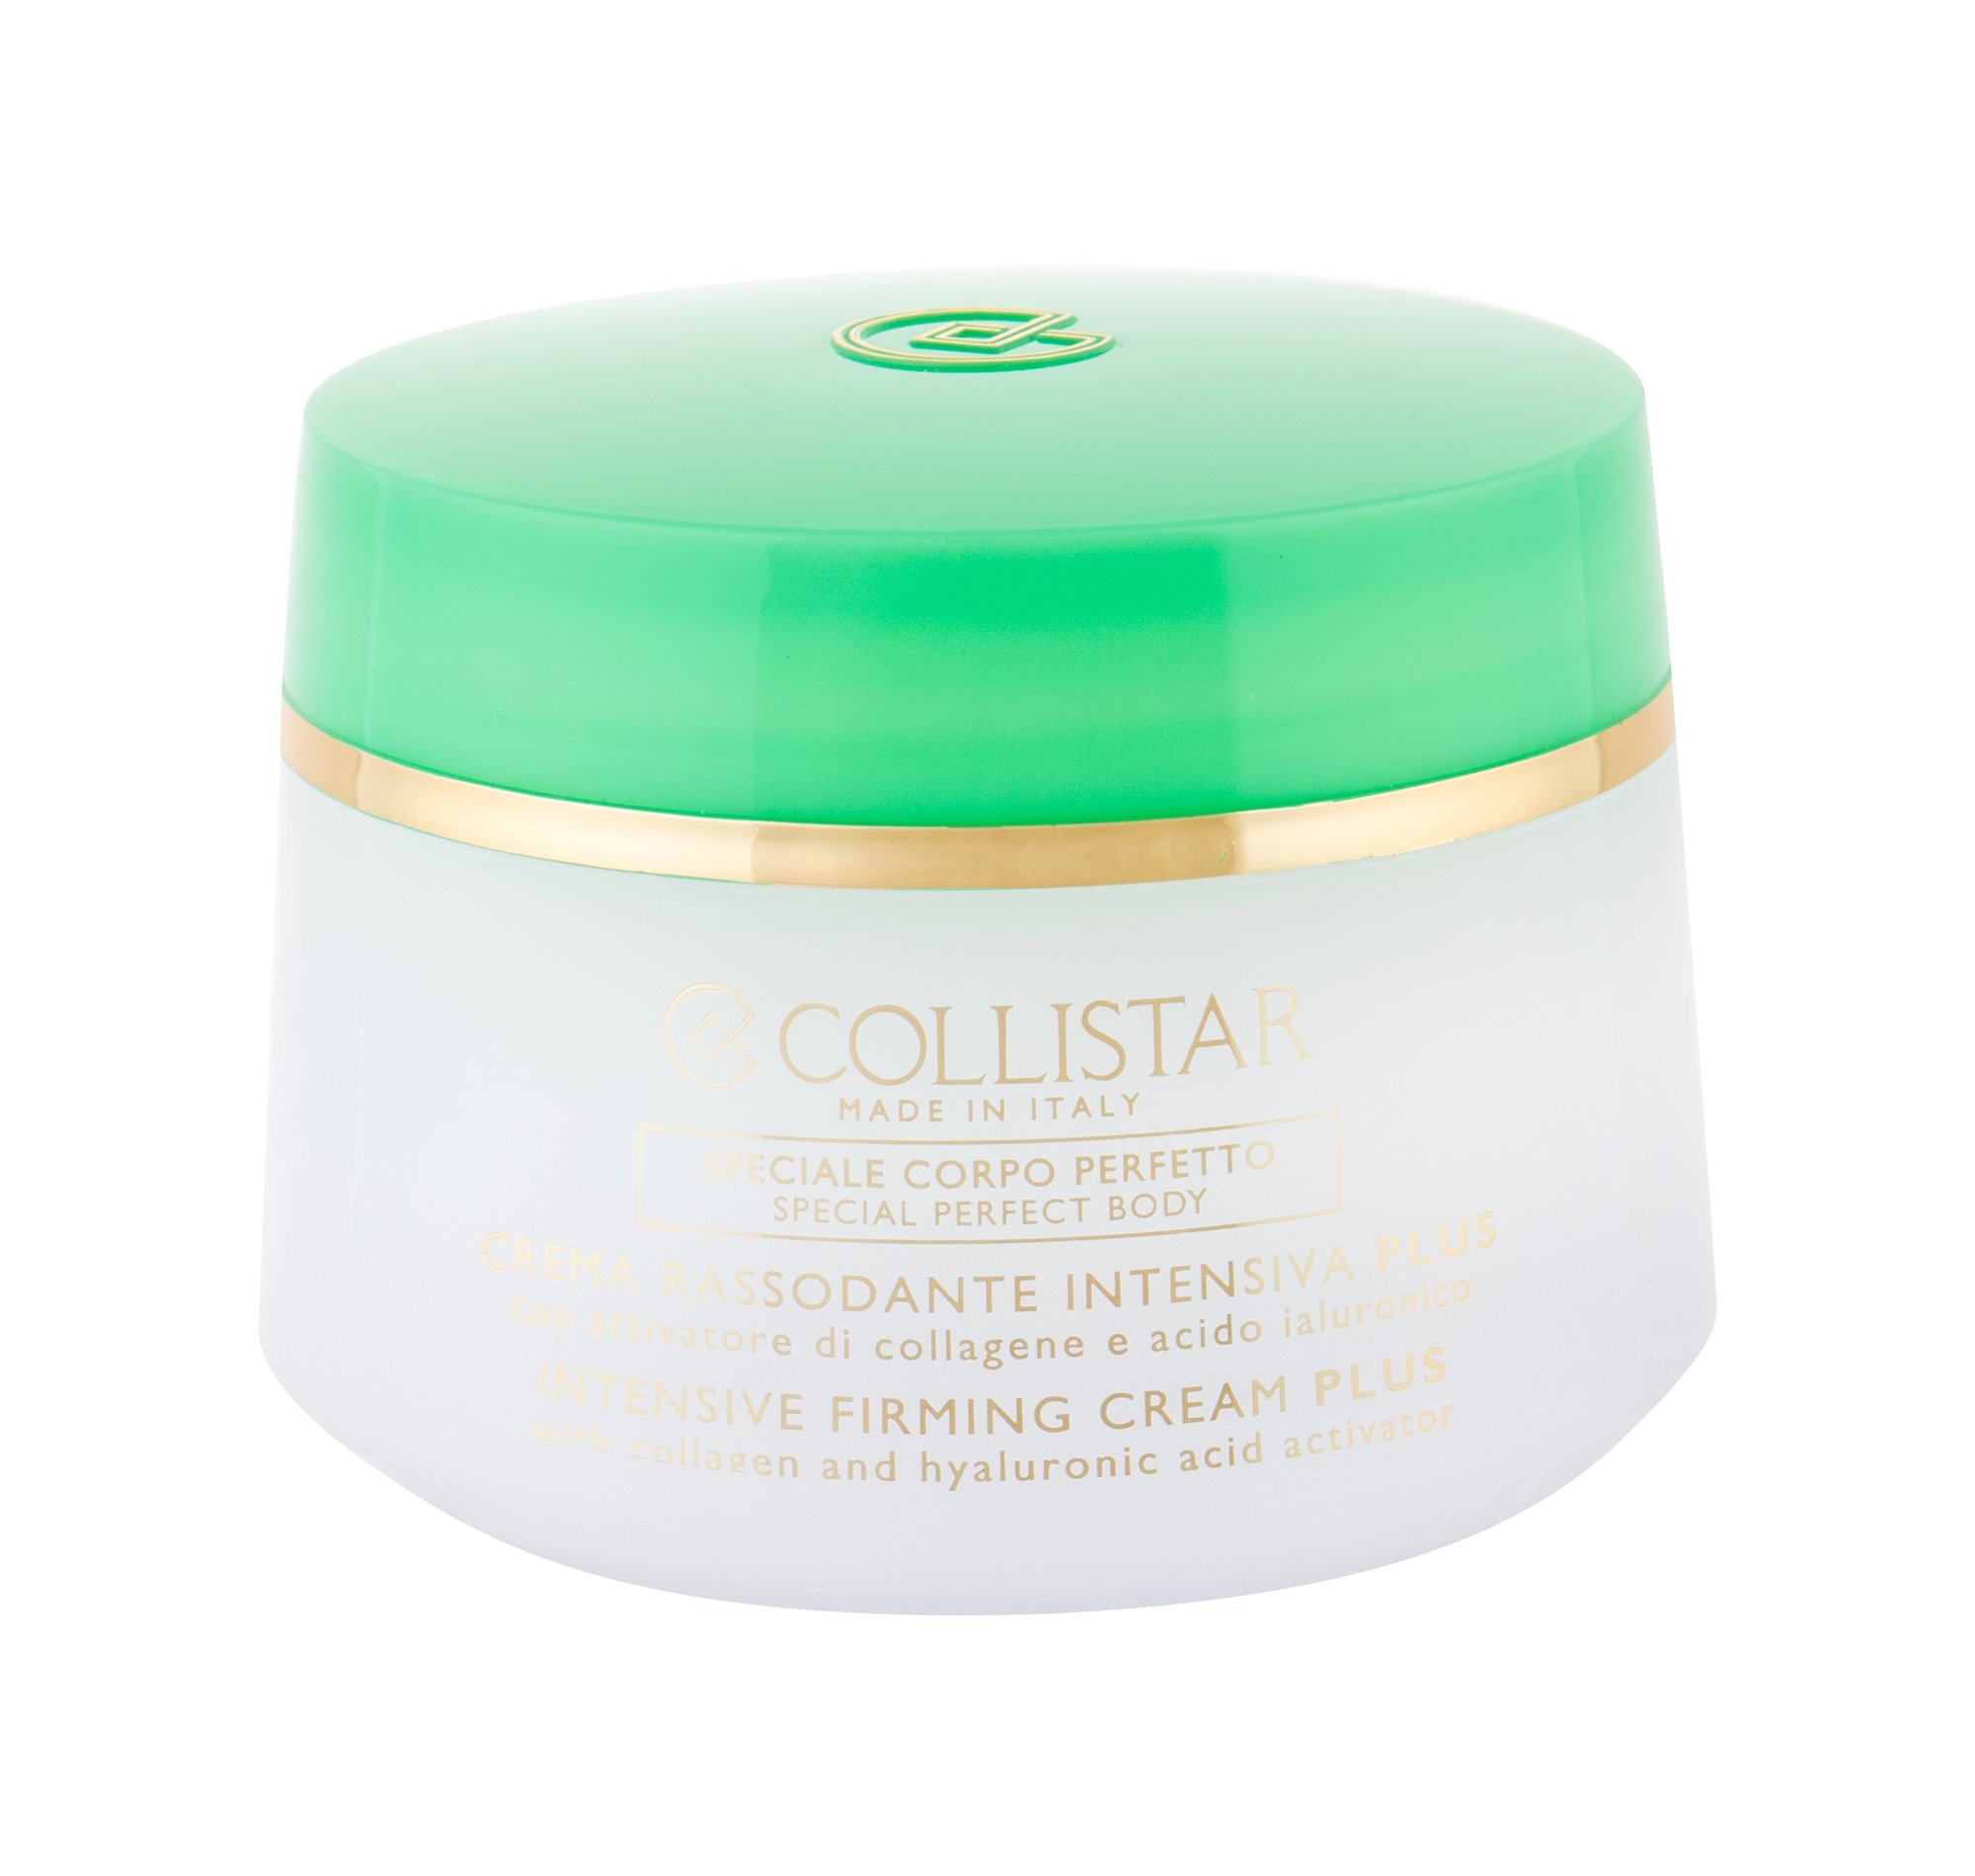 Collistar Special Perfect Body Intensive Firming Cream